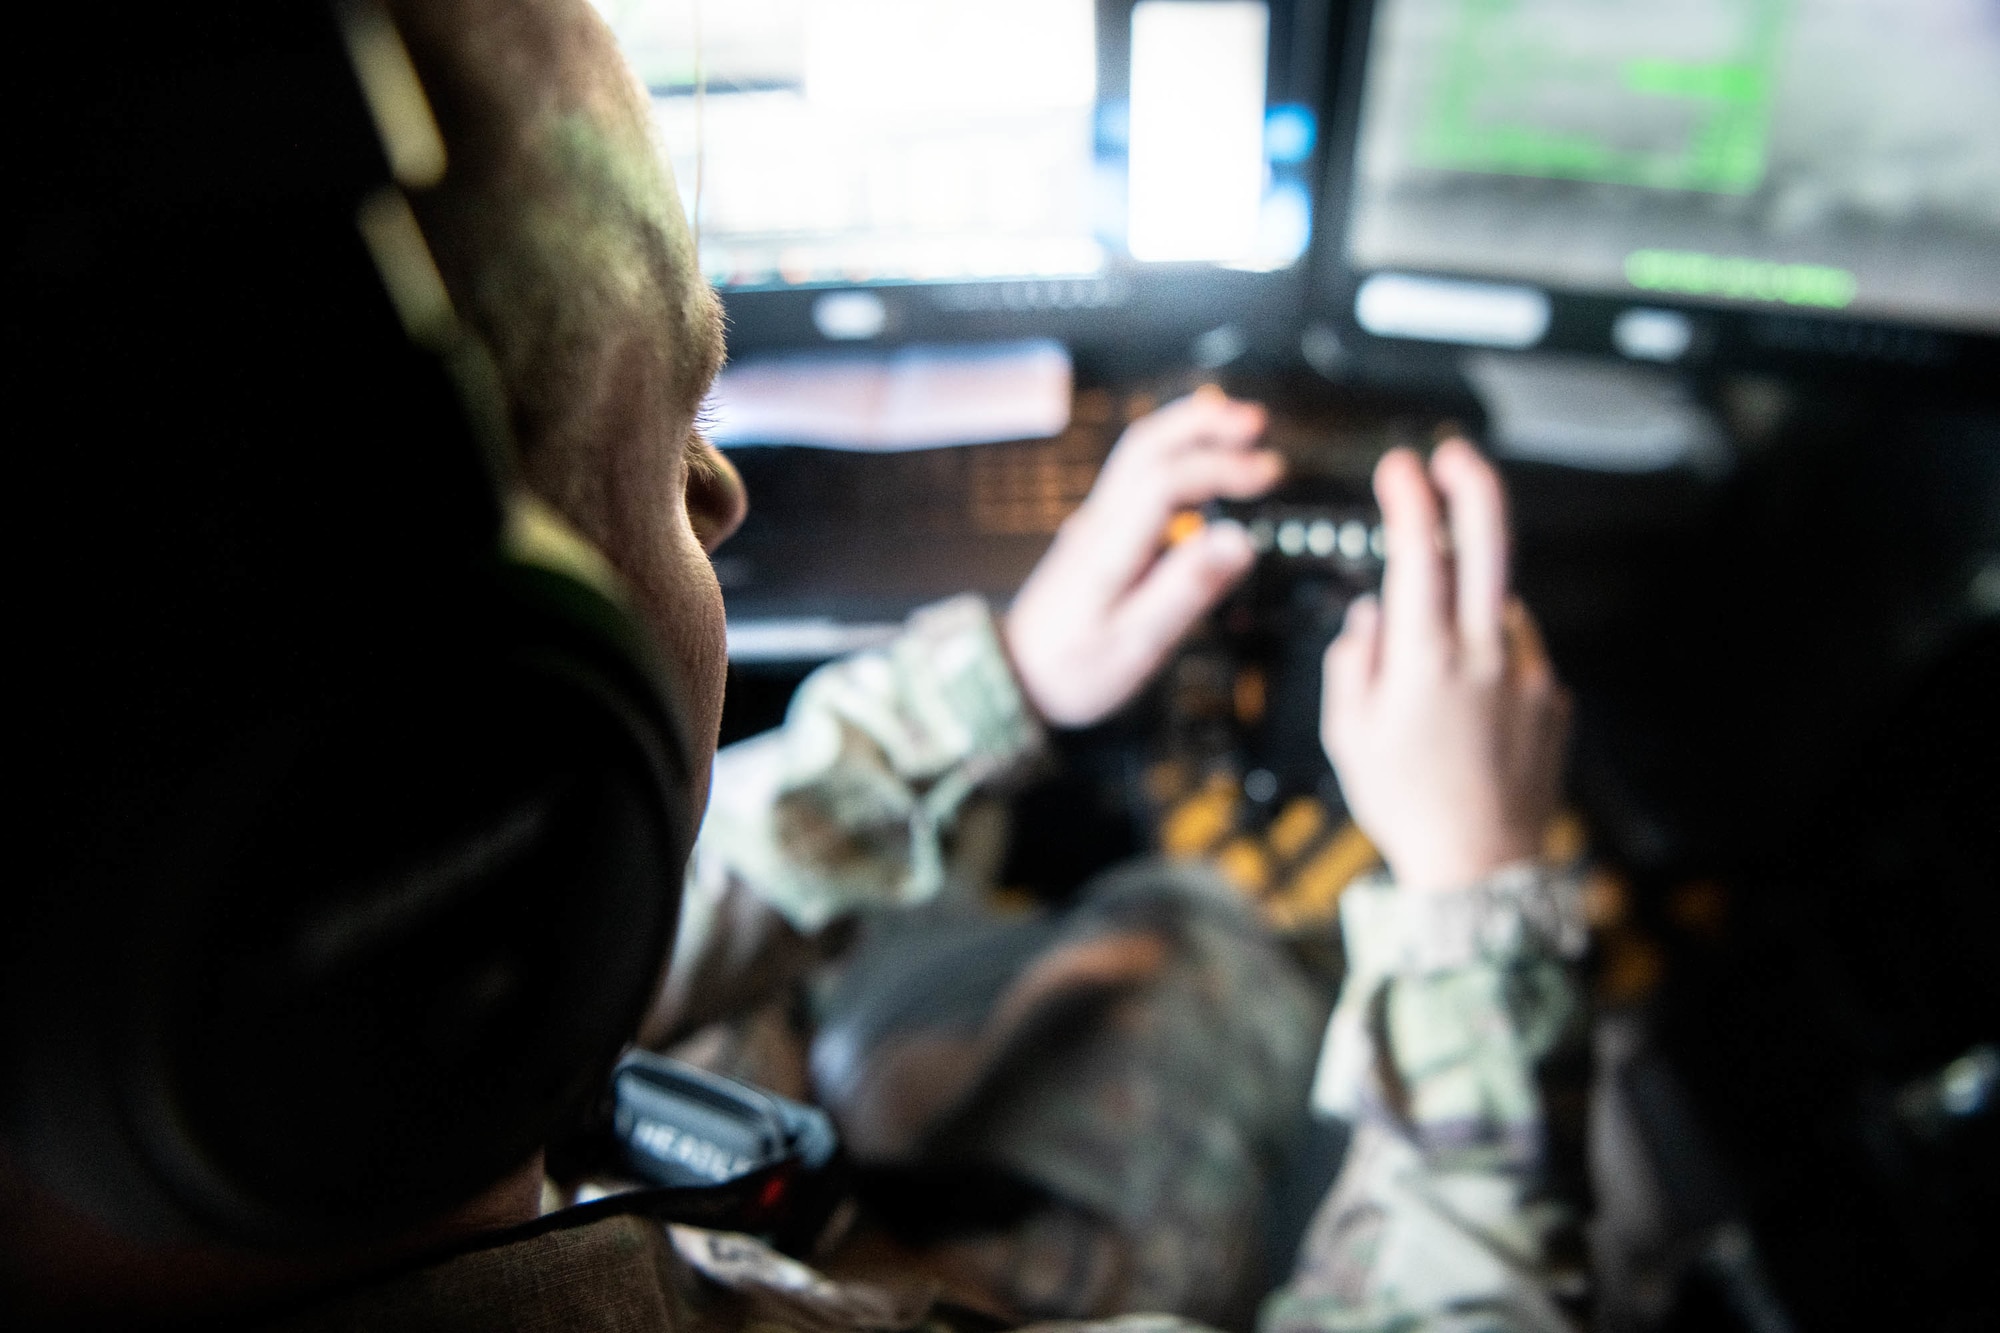 A U.S. Air Force combat systems officer conducts manned ISR operations